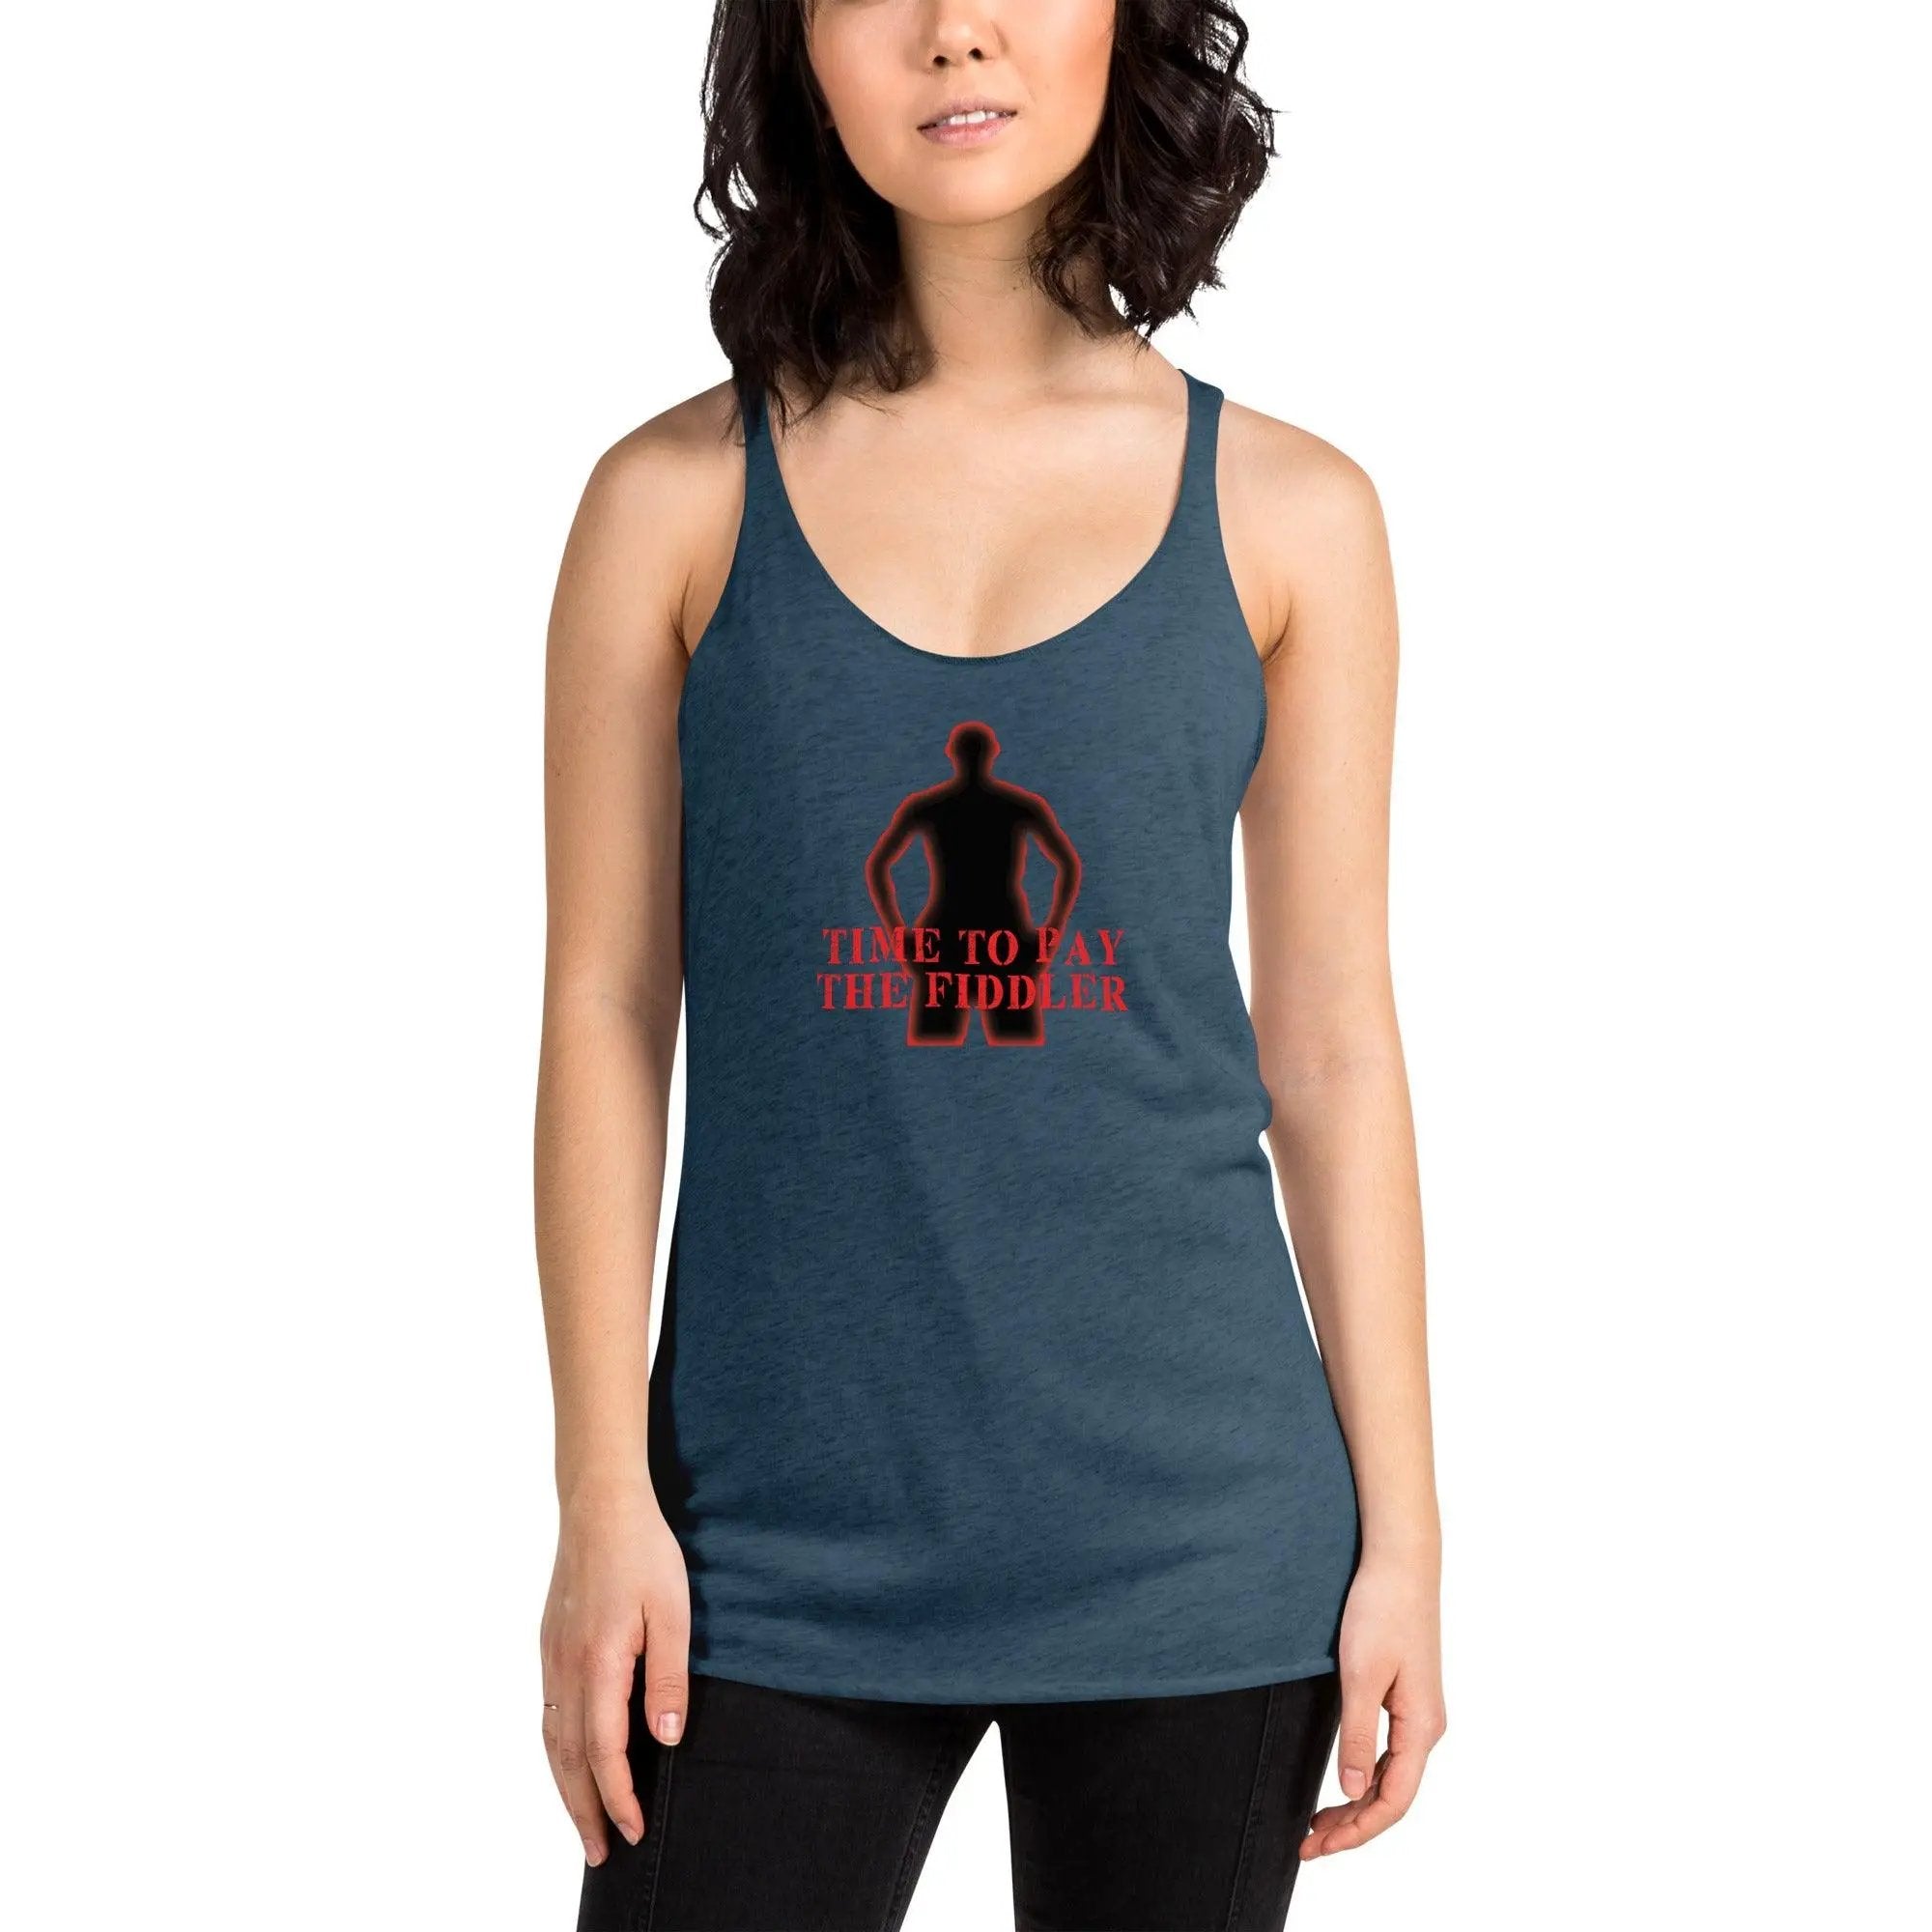 Time To Pay The Fiddler Women's Racerback Tank VAWDesigns